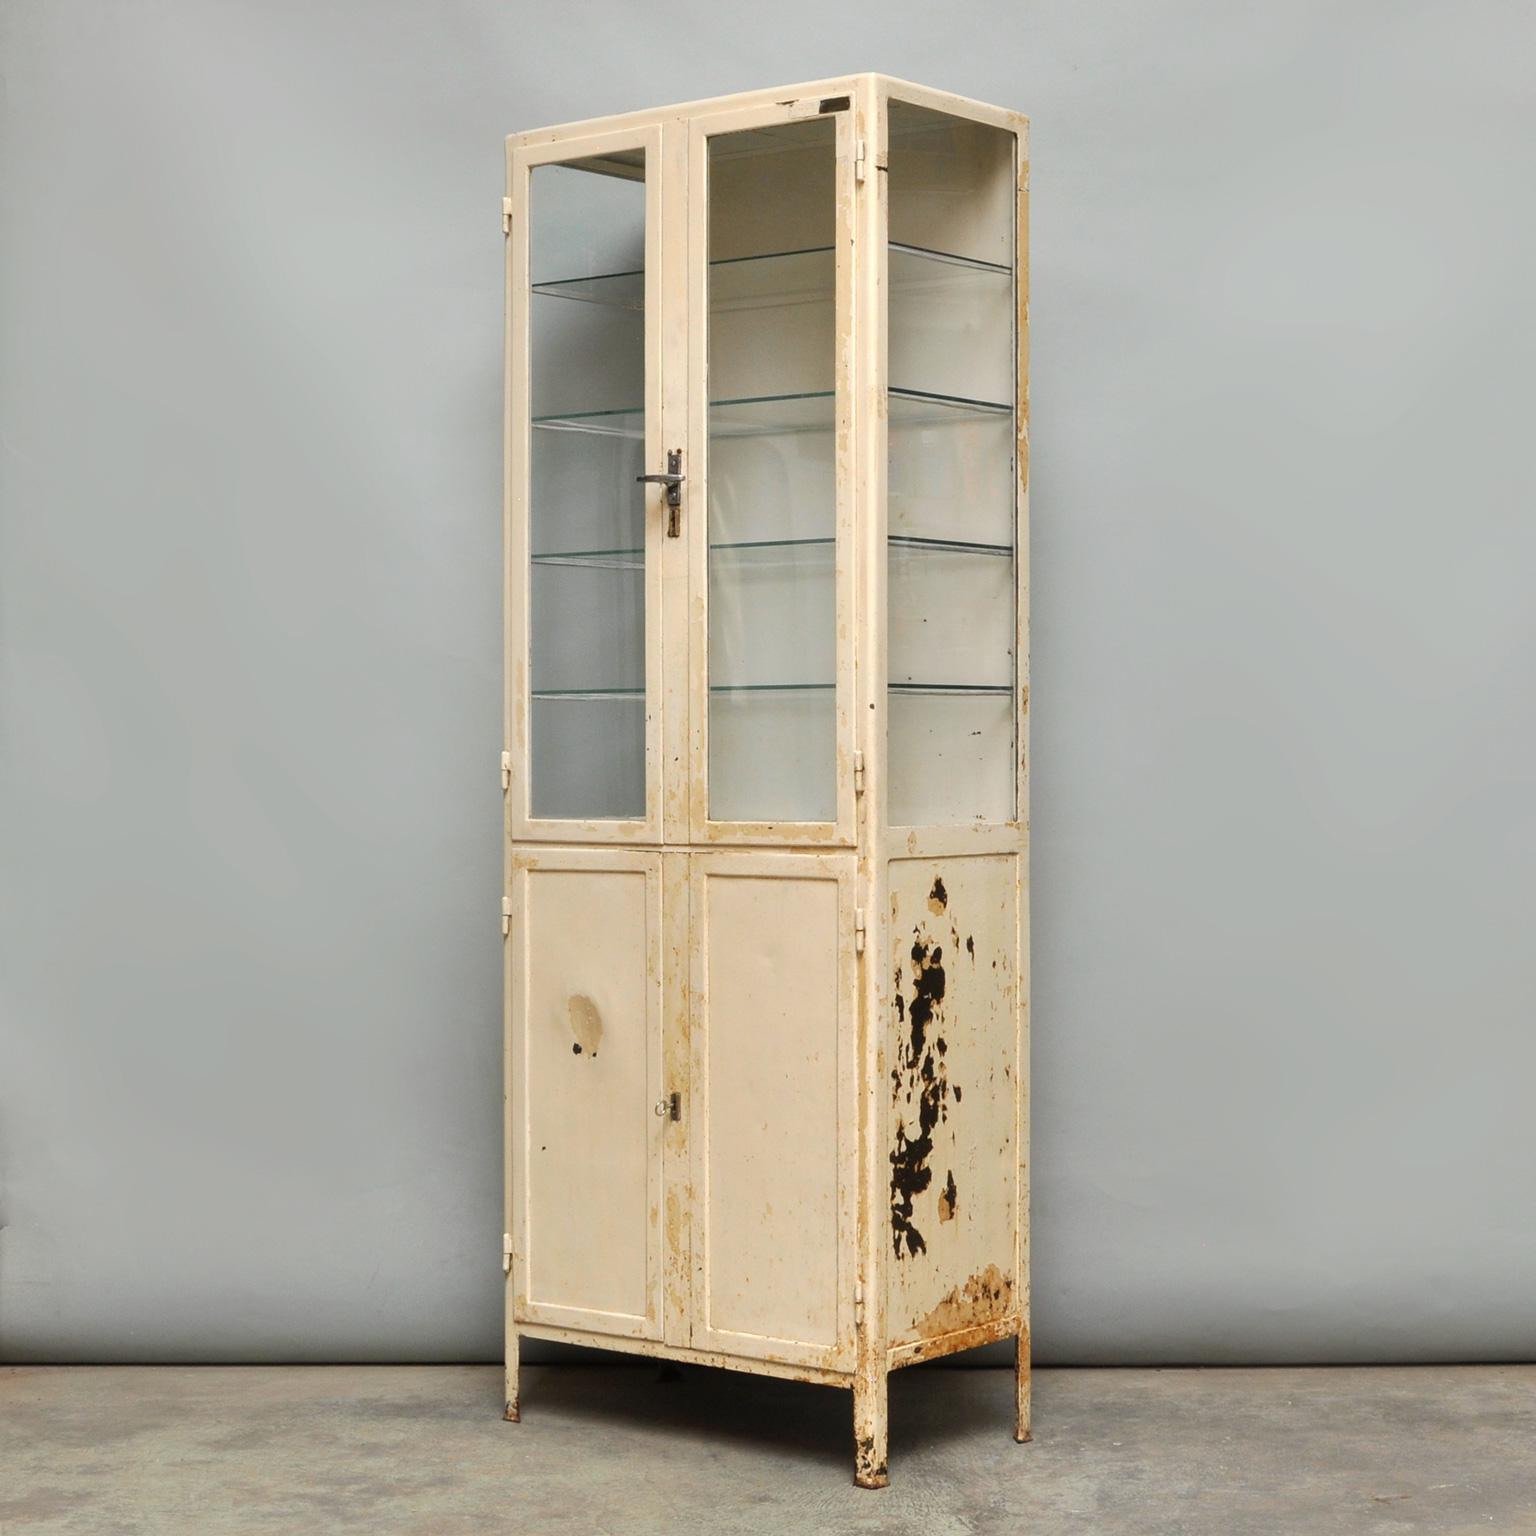 Medical cabinet with character from the 1940s. Produced in the Czech Republic. In the top part four glass shelves, in the bottom part two iron shelves. The cabinet is treated against rust and finished with a transparent lacquer to fix the paint.